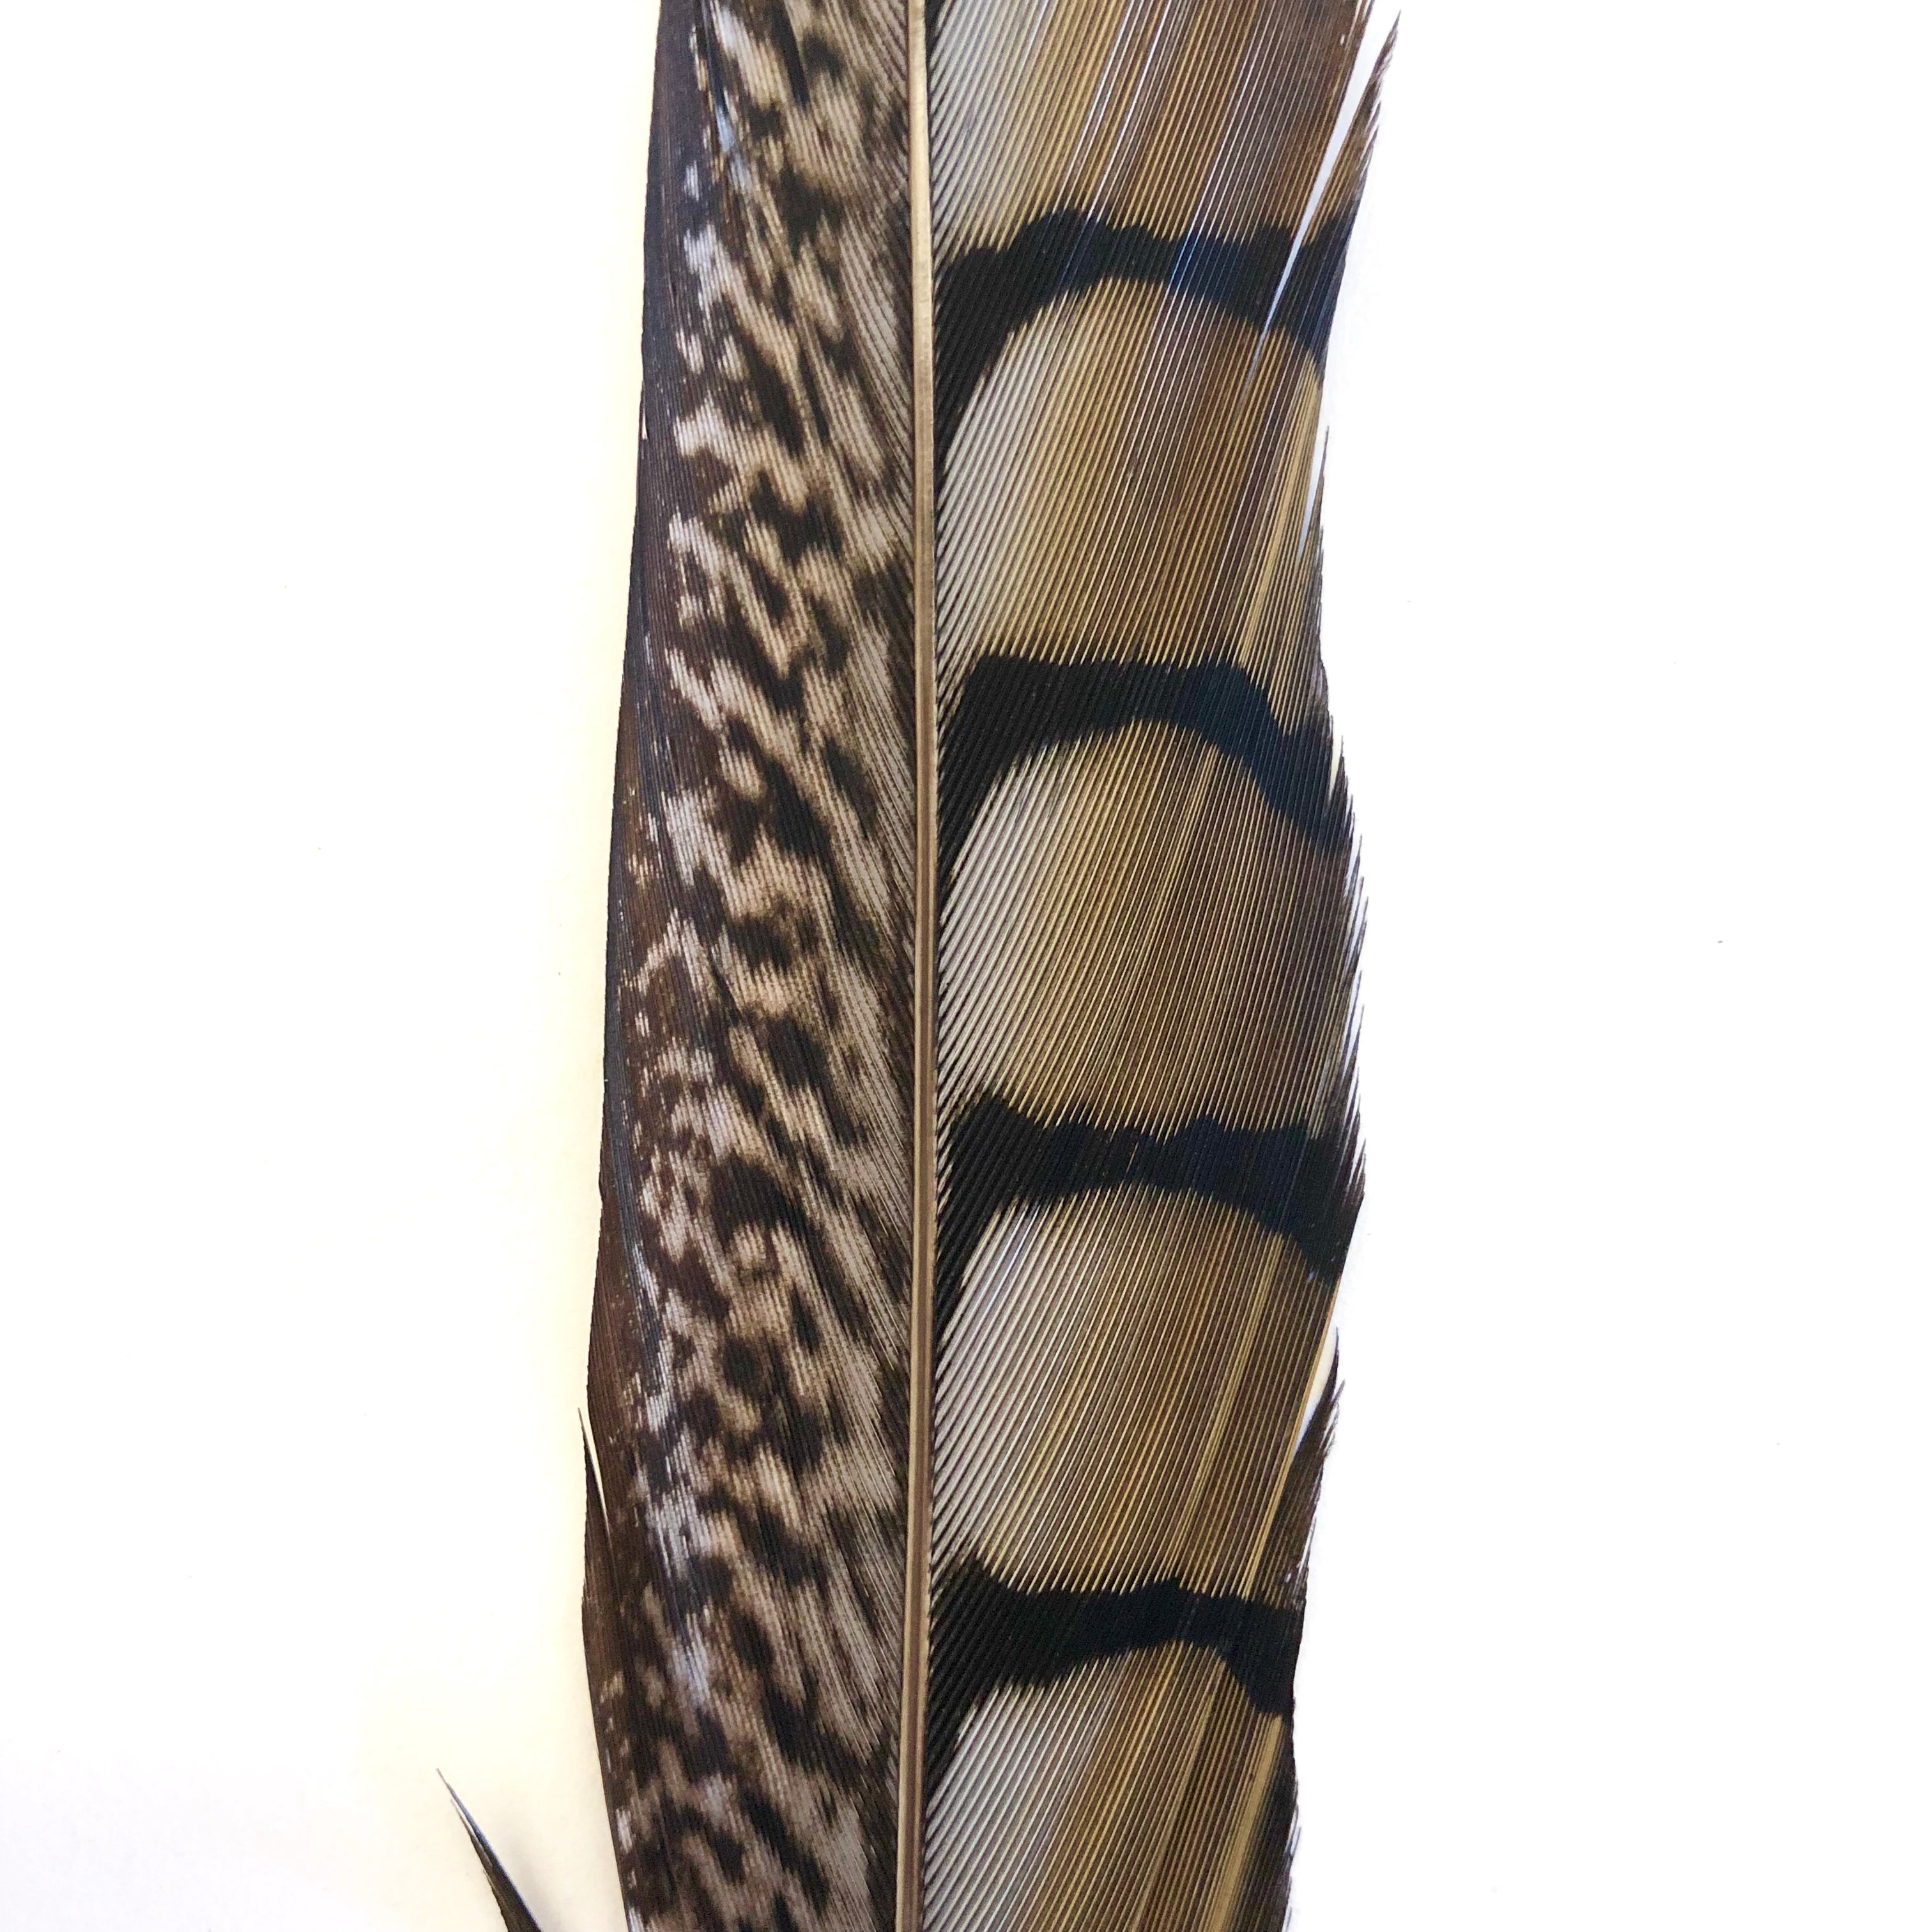 20" to 30" Lady Amherst Pheasant Side Tail Feather - Grey